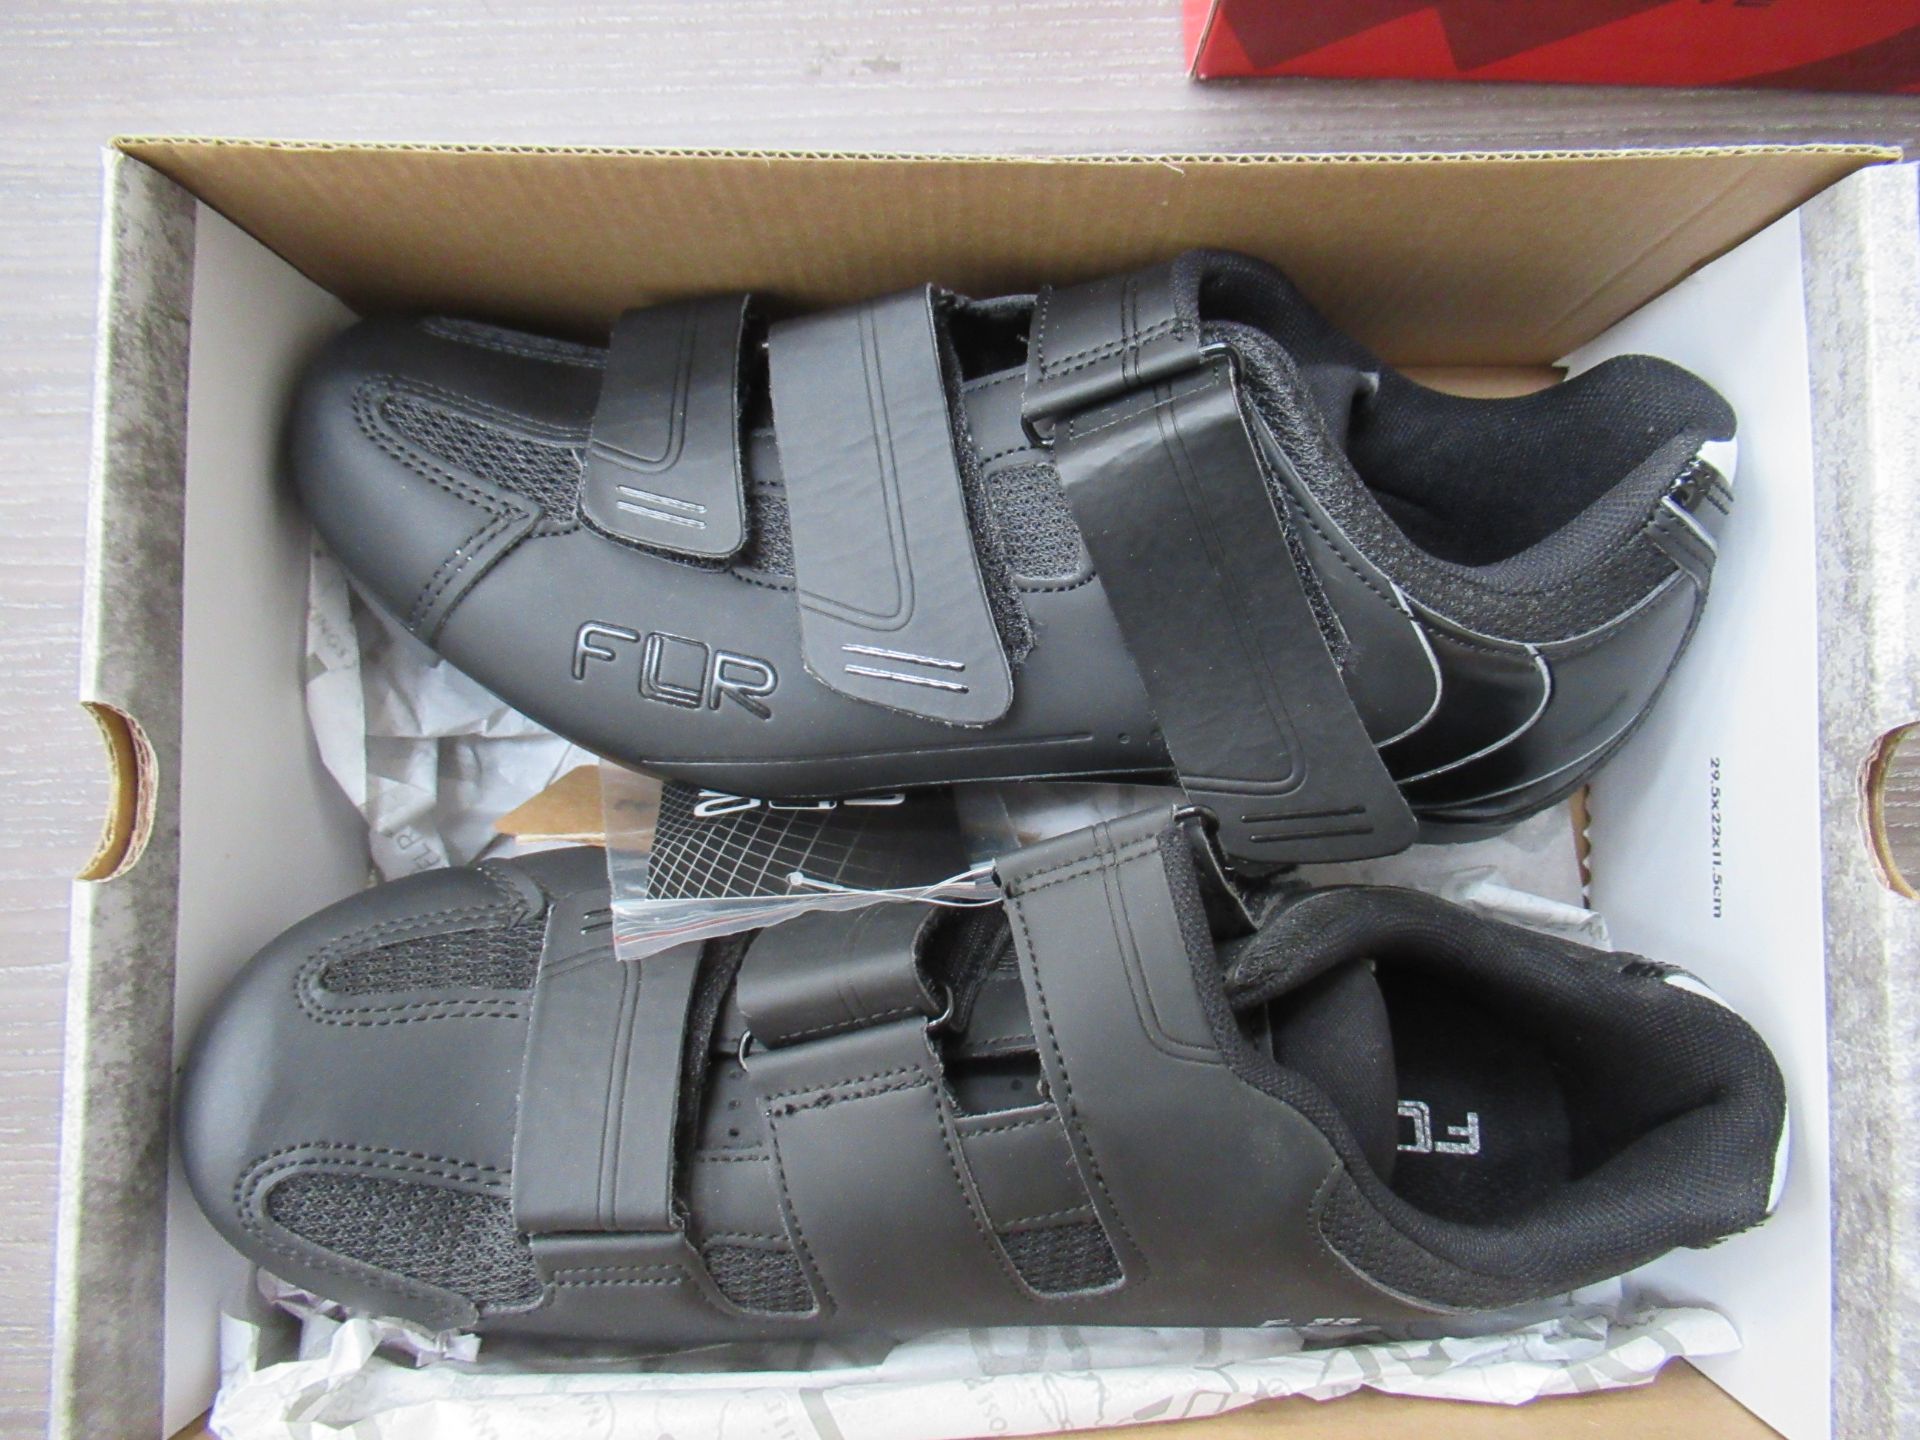 2 x Pairs of cycling shoes: 1 x Northwave Katana SRS boxed EU size 42 (RRP£99.99) and 1 x FLR F-35 I - Image 6 of 7